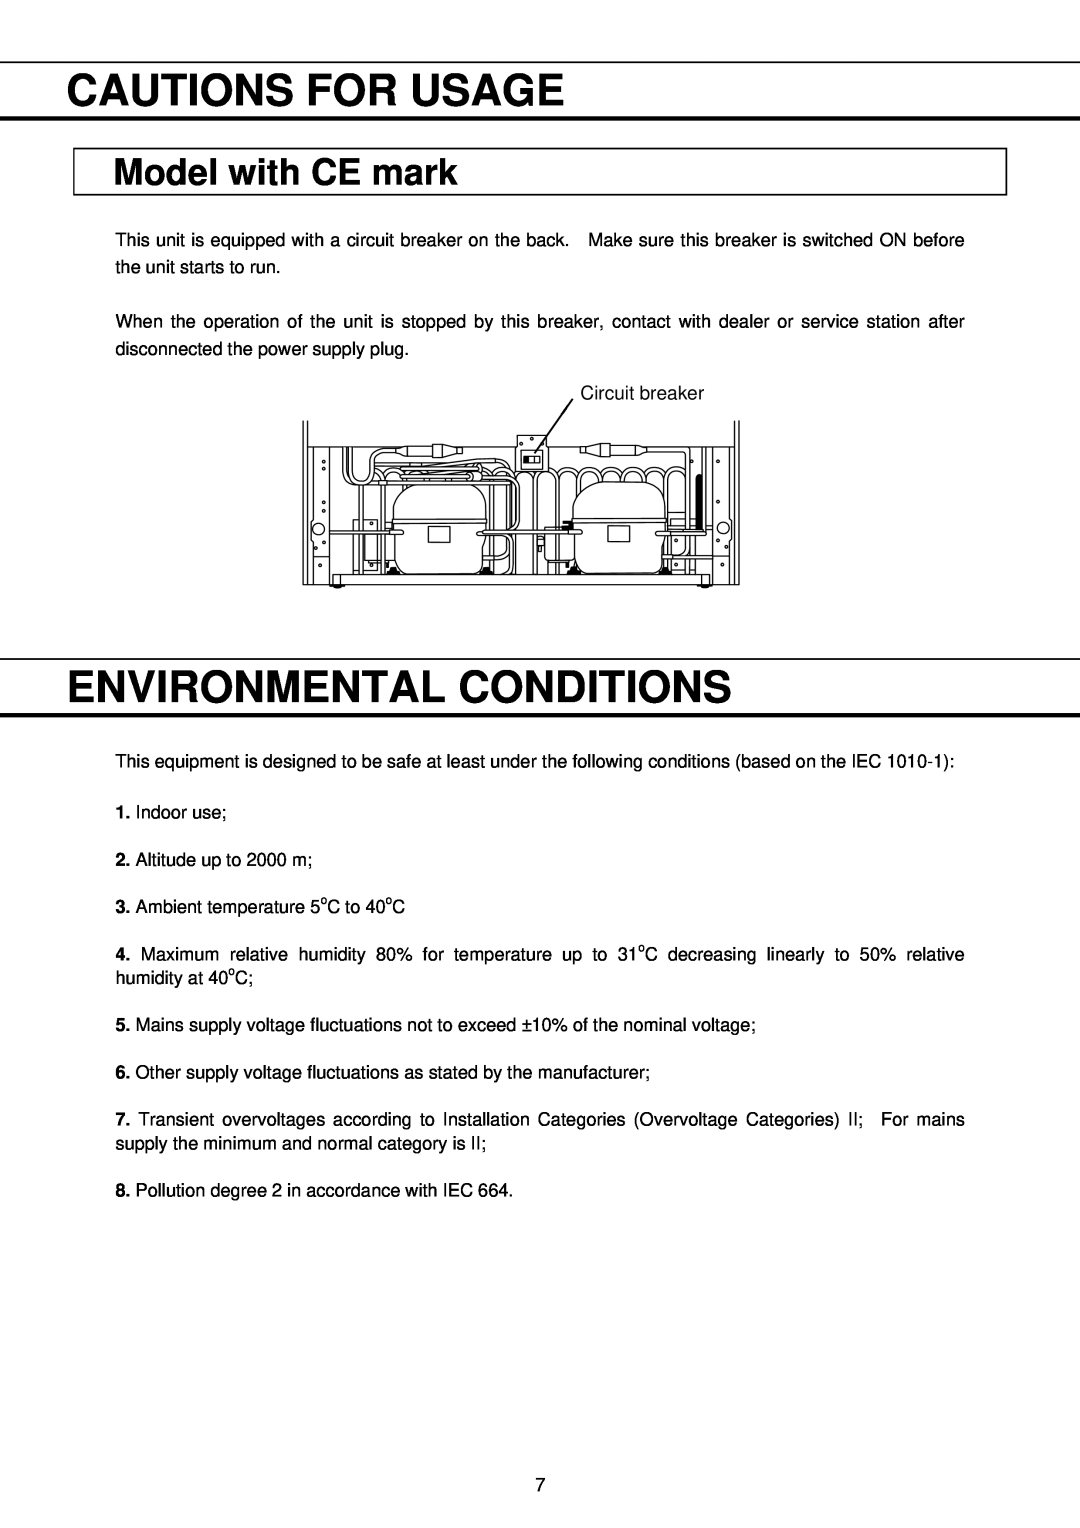 Sanyo MPR-411FR instruction manual Environmental Conditions, Model with CE mark, Cautions For Usage 